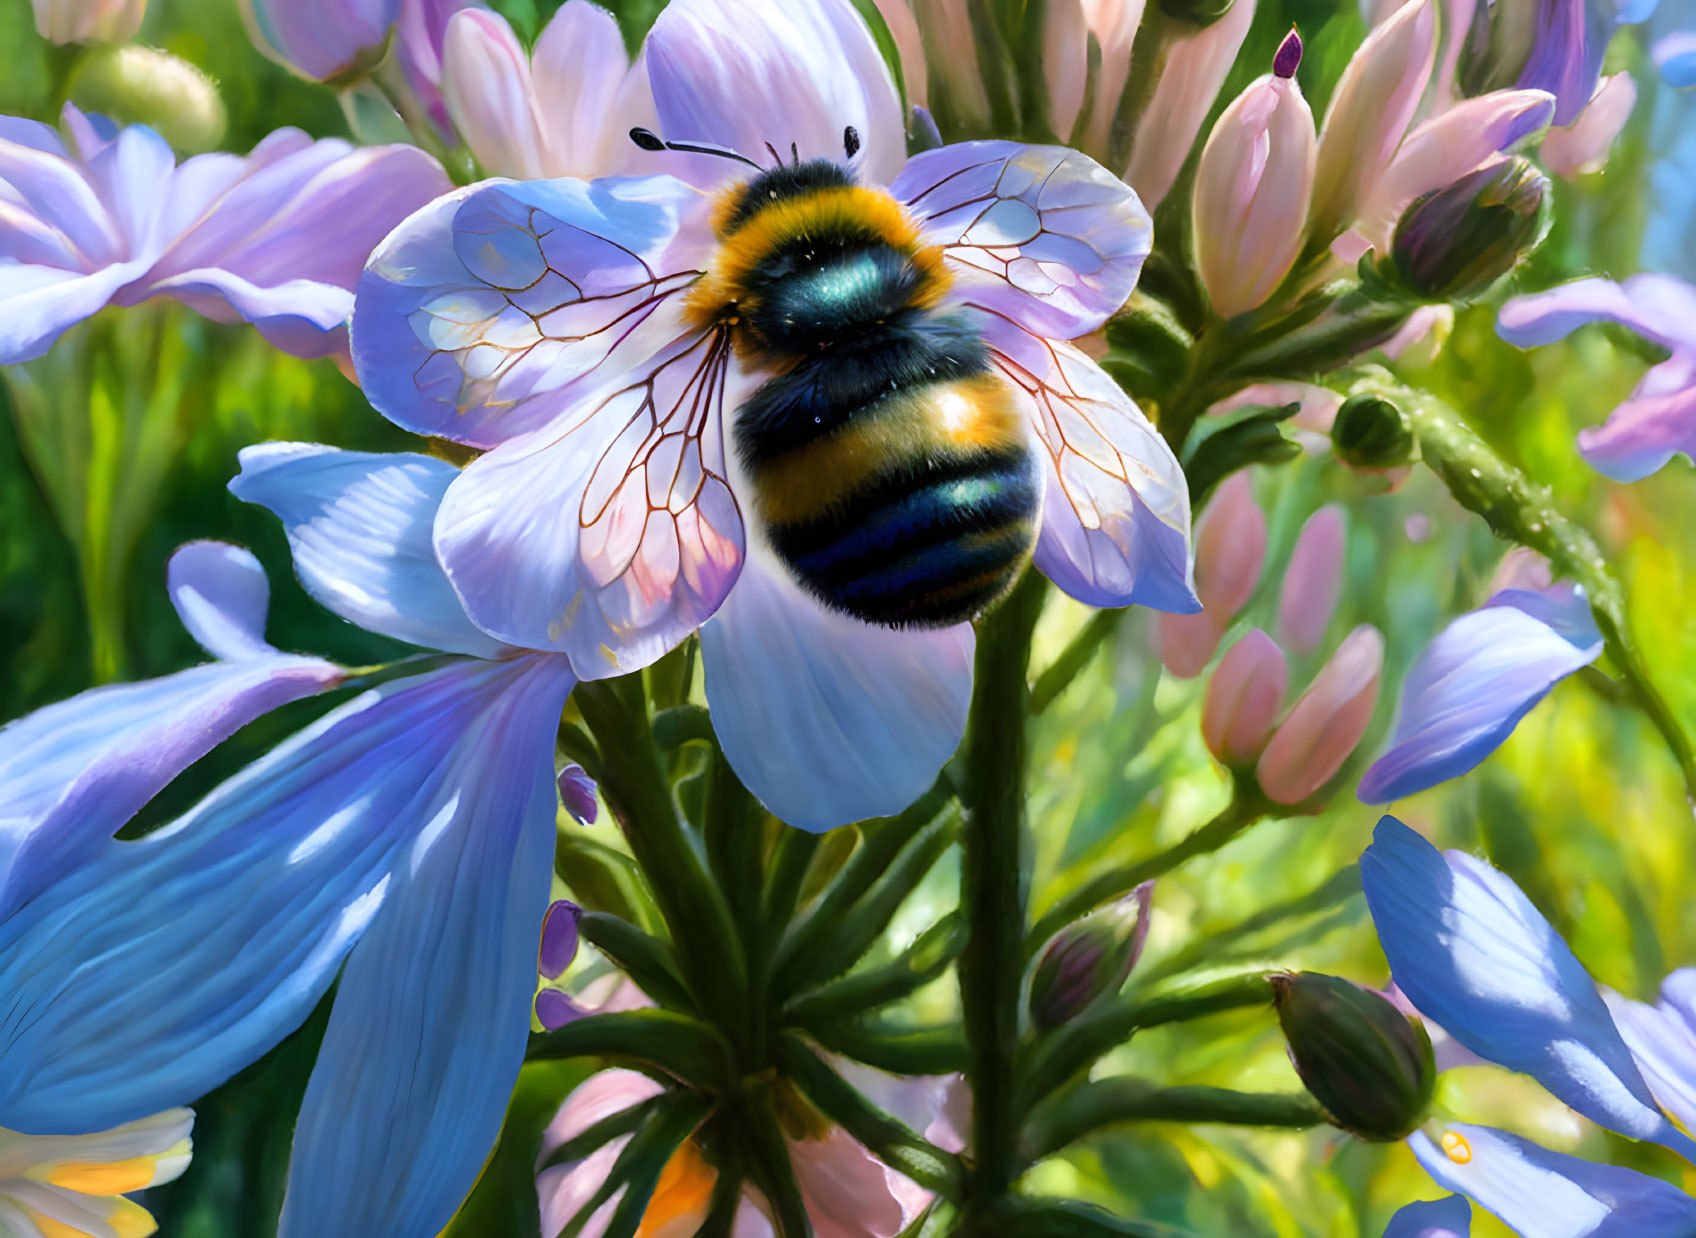 Transparent-winged bumblebee on blue flower petals in sunlight